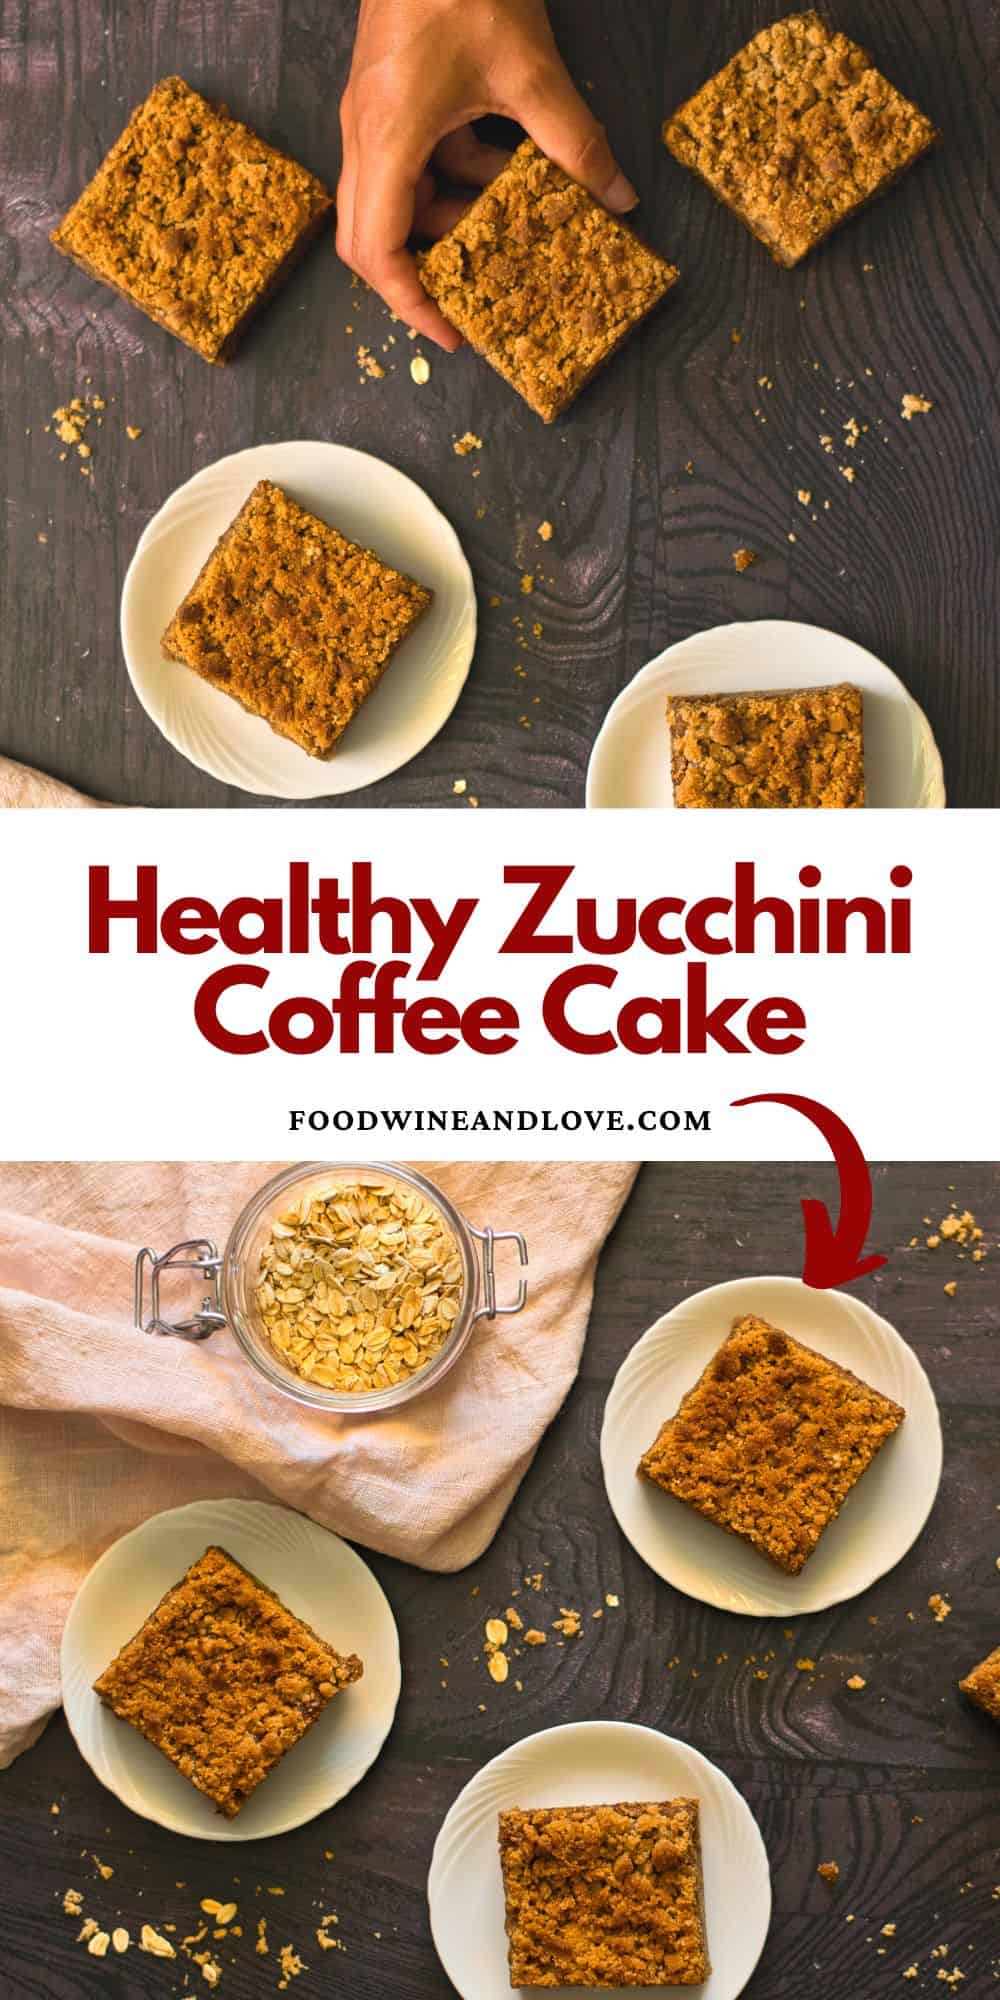 Mediterranean Diet Zucchini Coffee Cake, a delicious dessert recipe made with oats and sweetened with dates. Vegan.